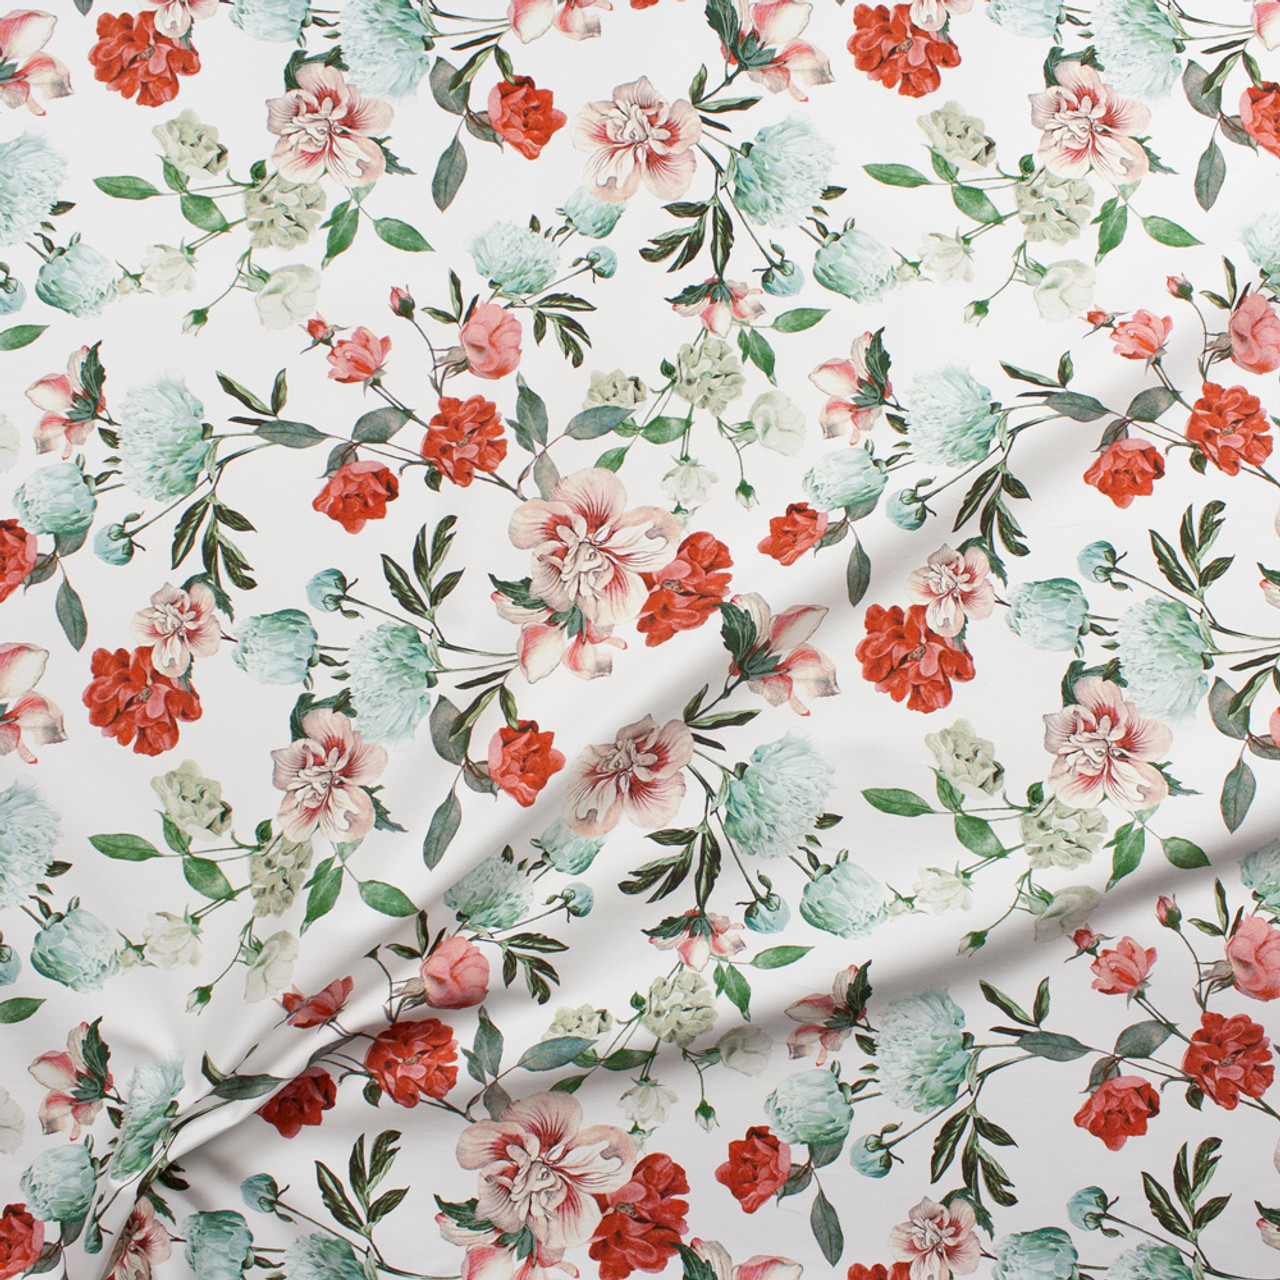 Cali Fabrics Red, Pink, and Aqua Floral on White Designer Stretch Sateen  Fabric by the Yard